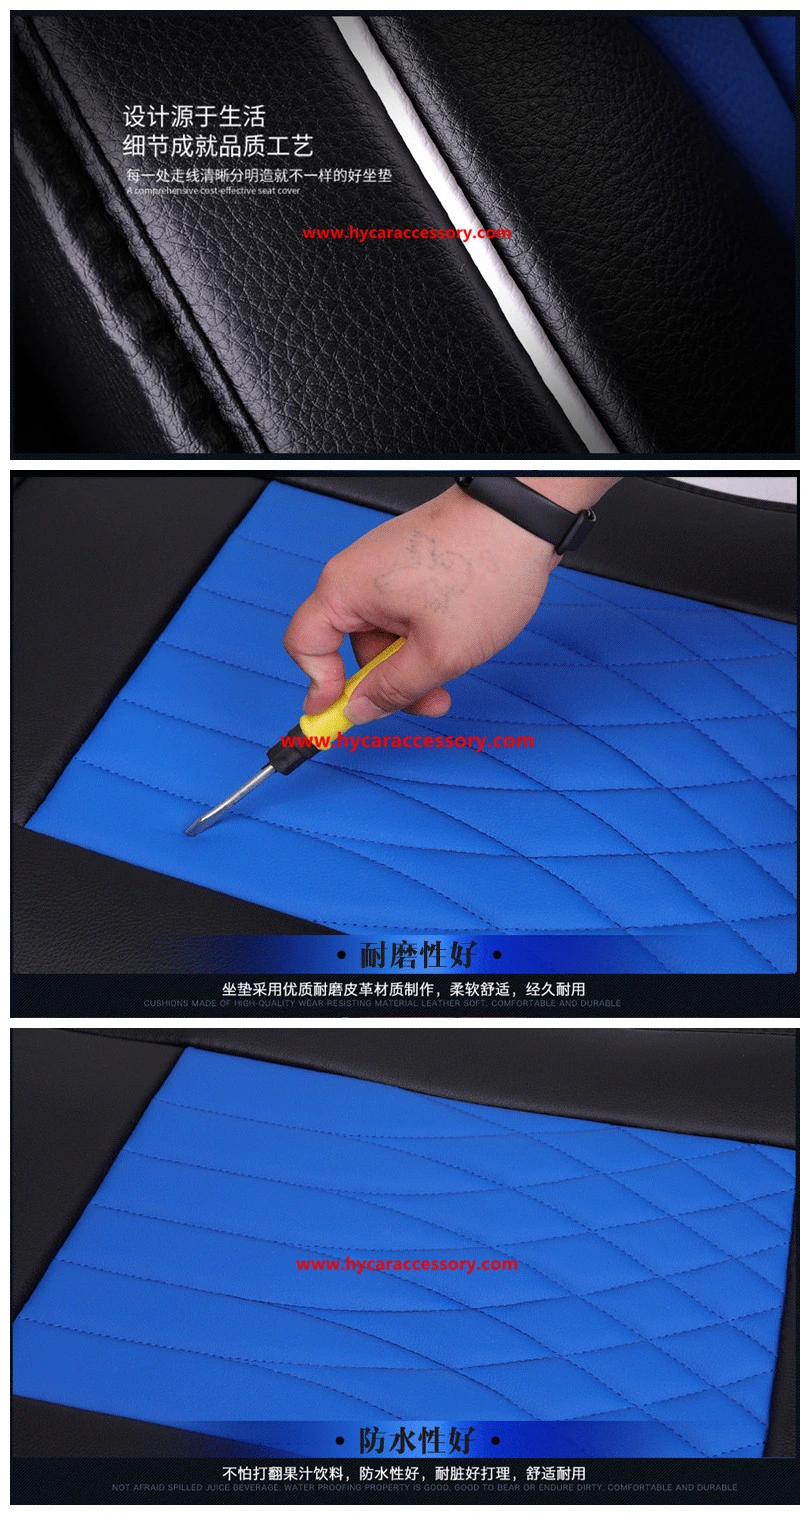 Auto Accessories All Weather Seat Cushion Universal Super-Fiber Leather Car Seat Cover